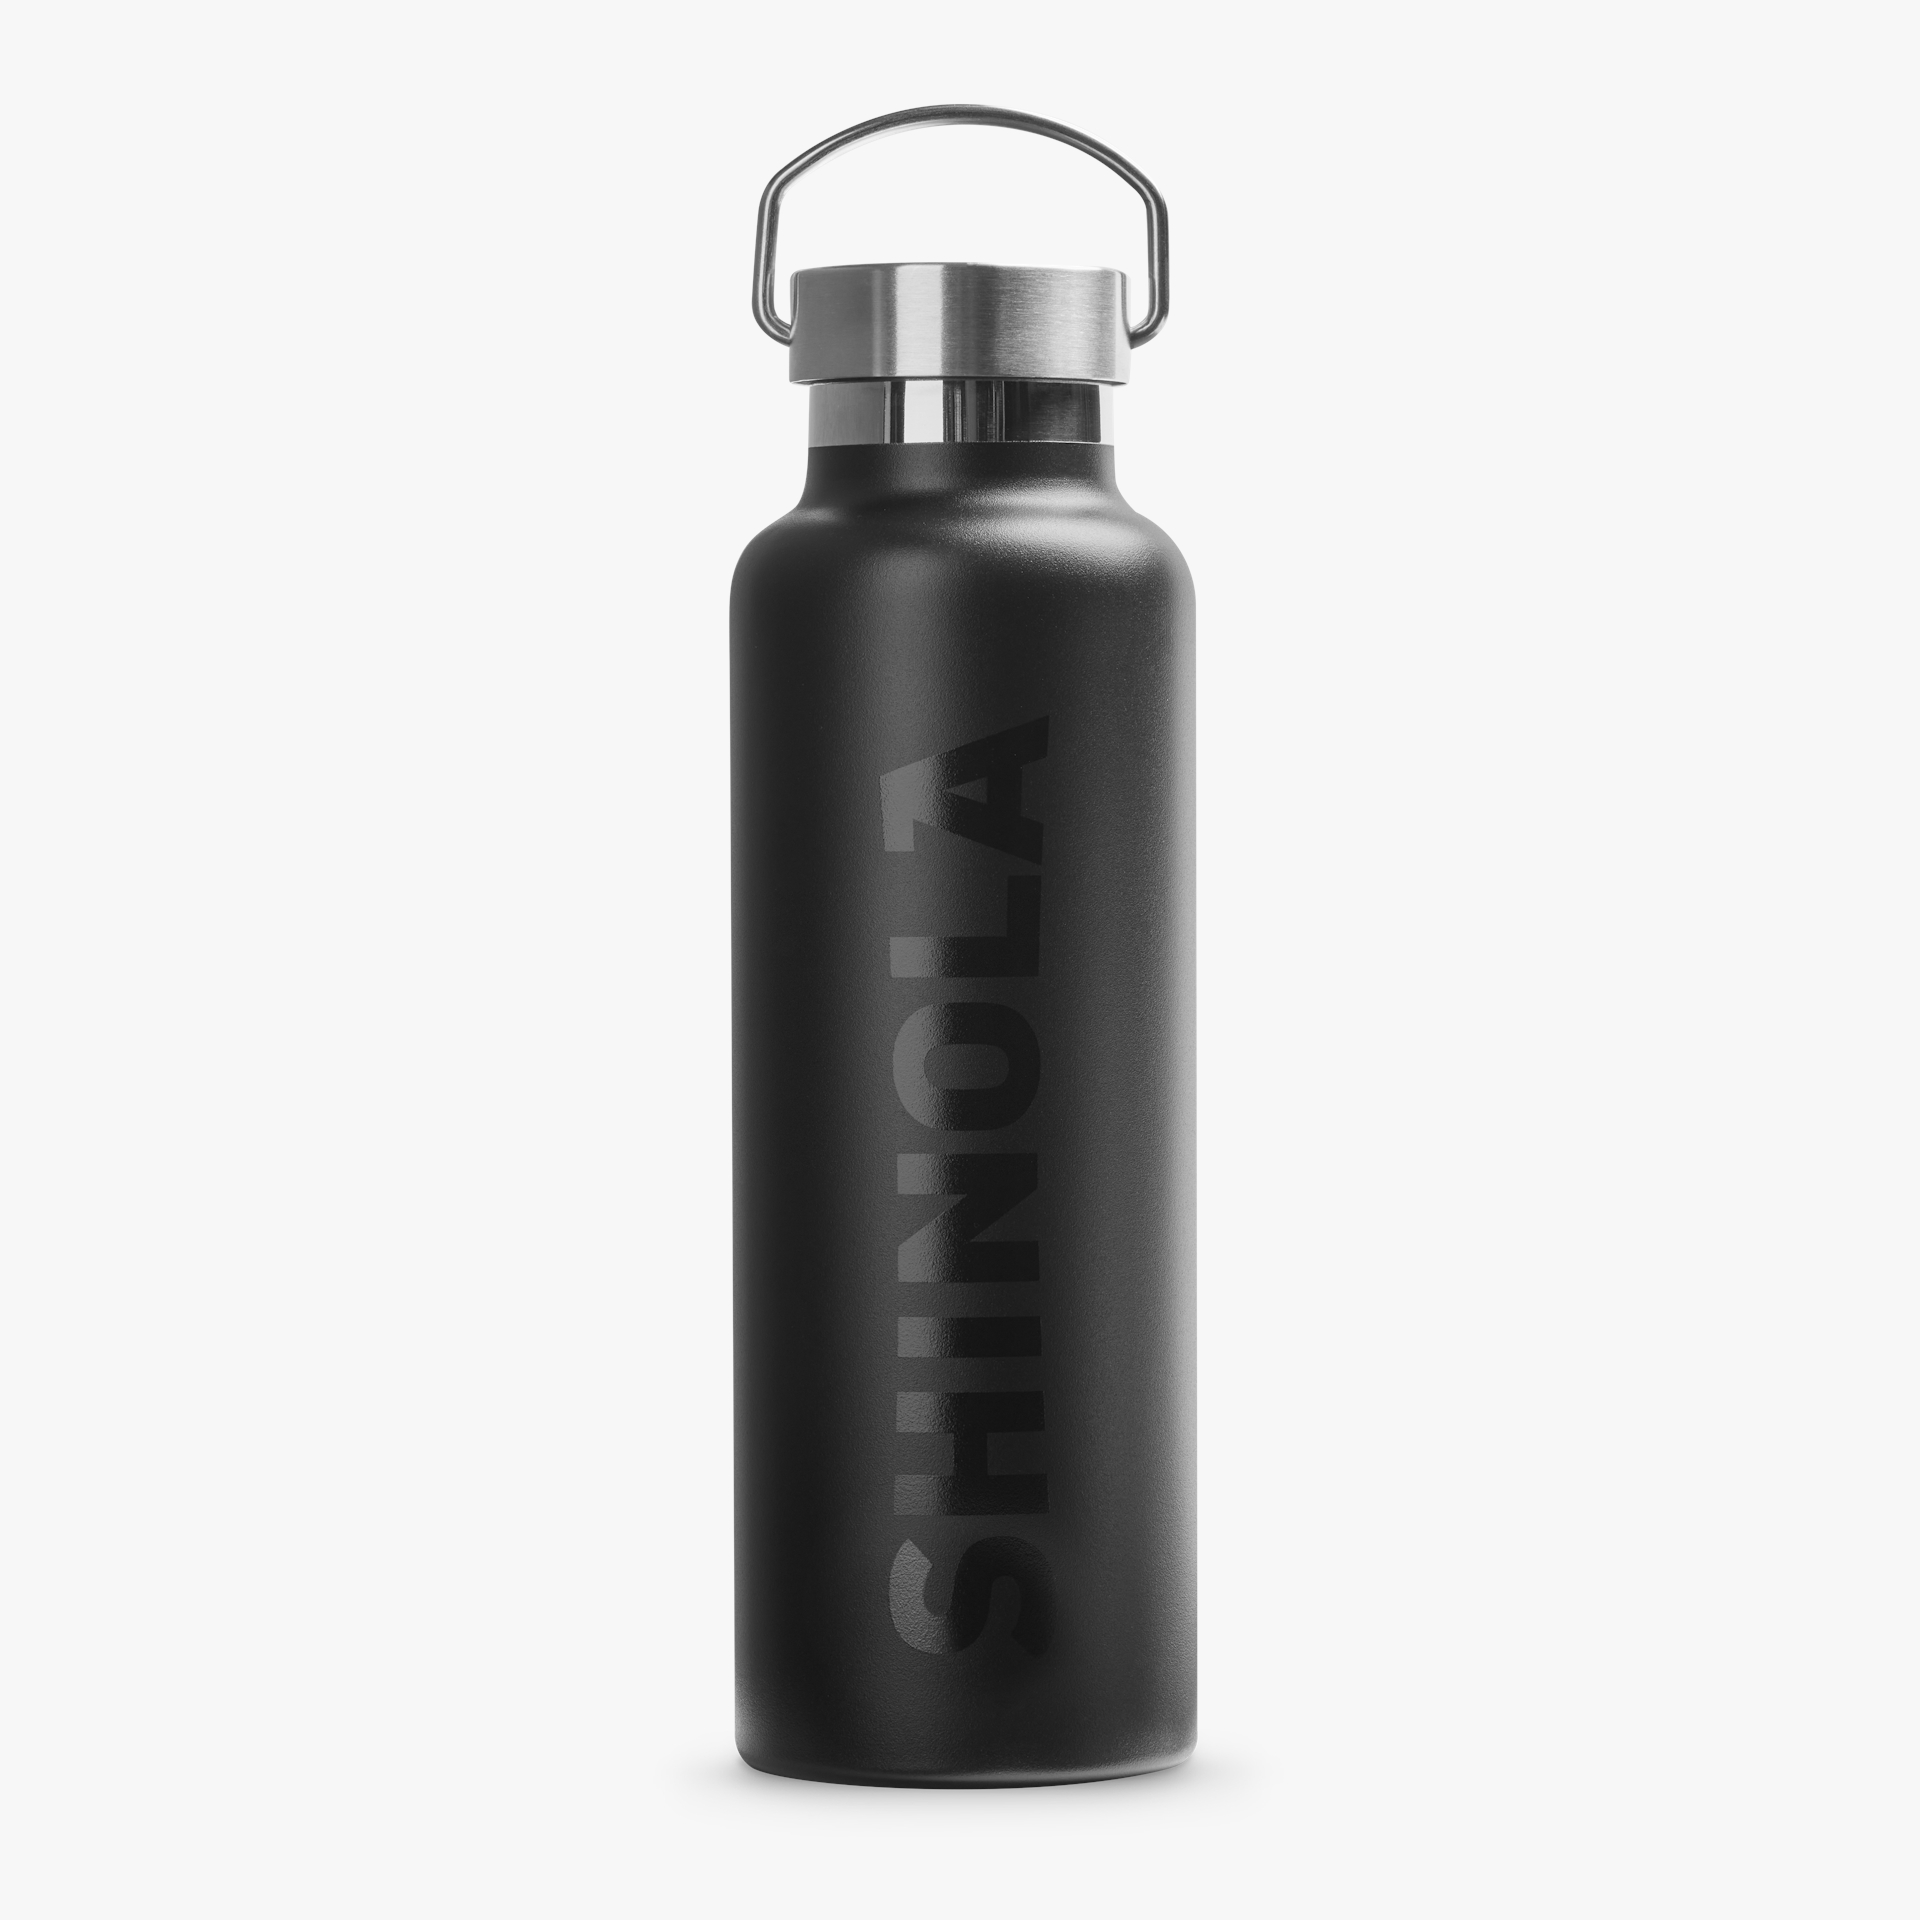 https://shinola-m2.imgix.net/images/Products/20273082-sdt-000011458/20273082_BlackStainlesWaterBottle_Steel_V1_MAIN_01.png?bg=f7f7f7&q=100&auto=format,compress